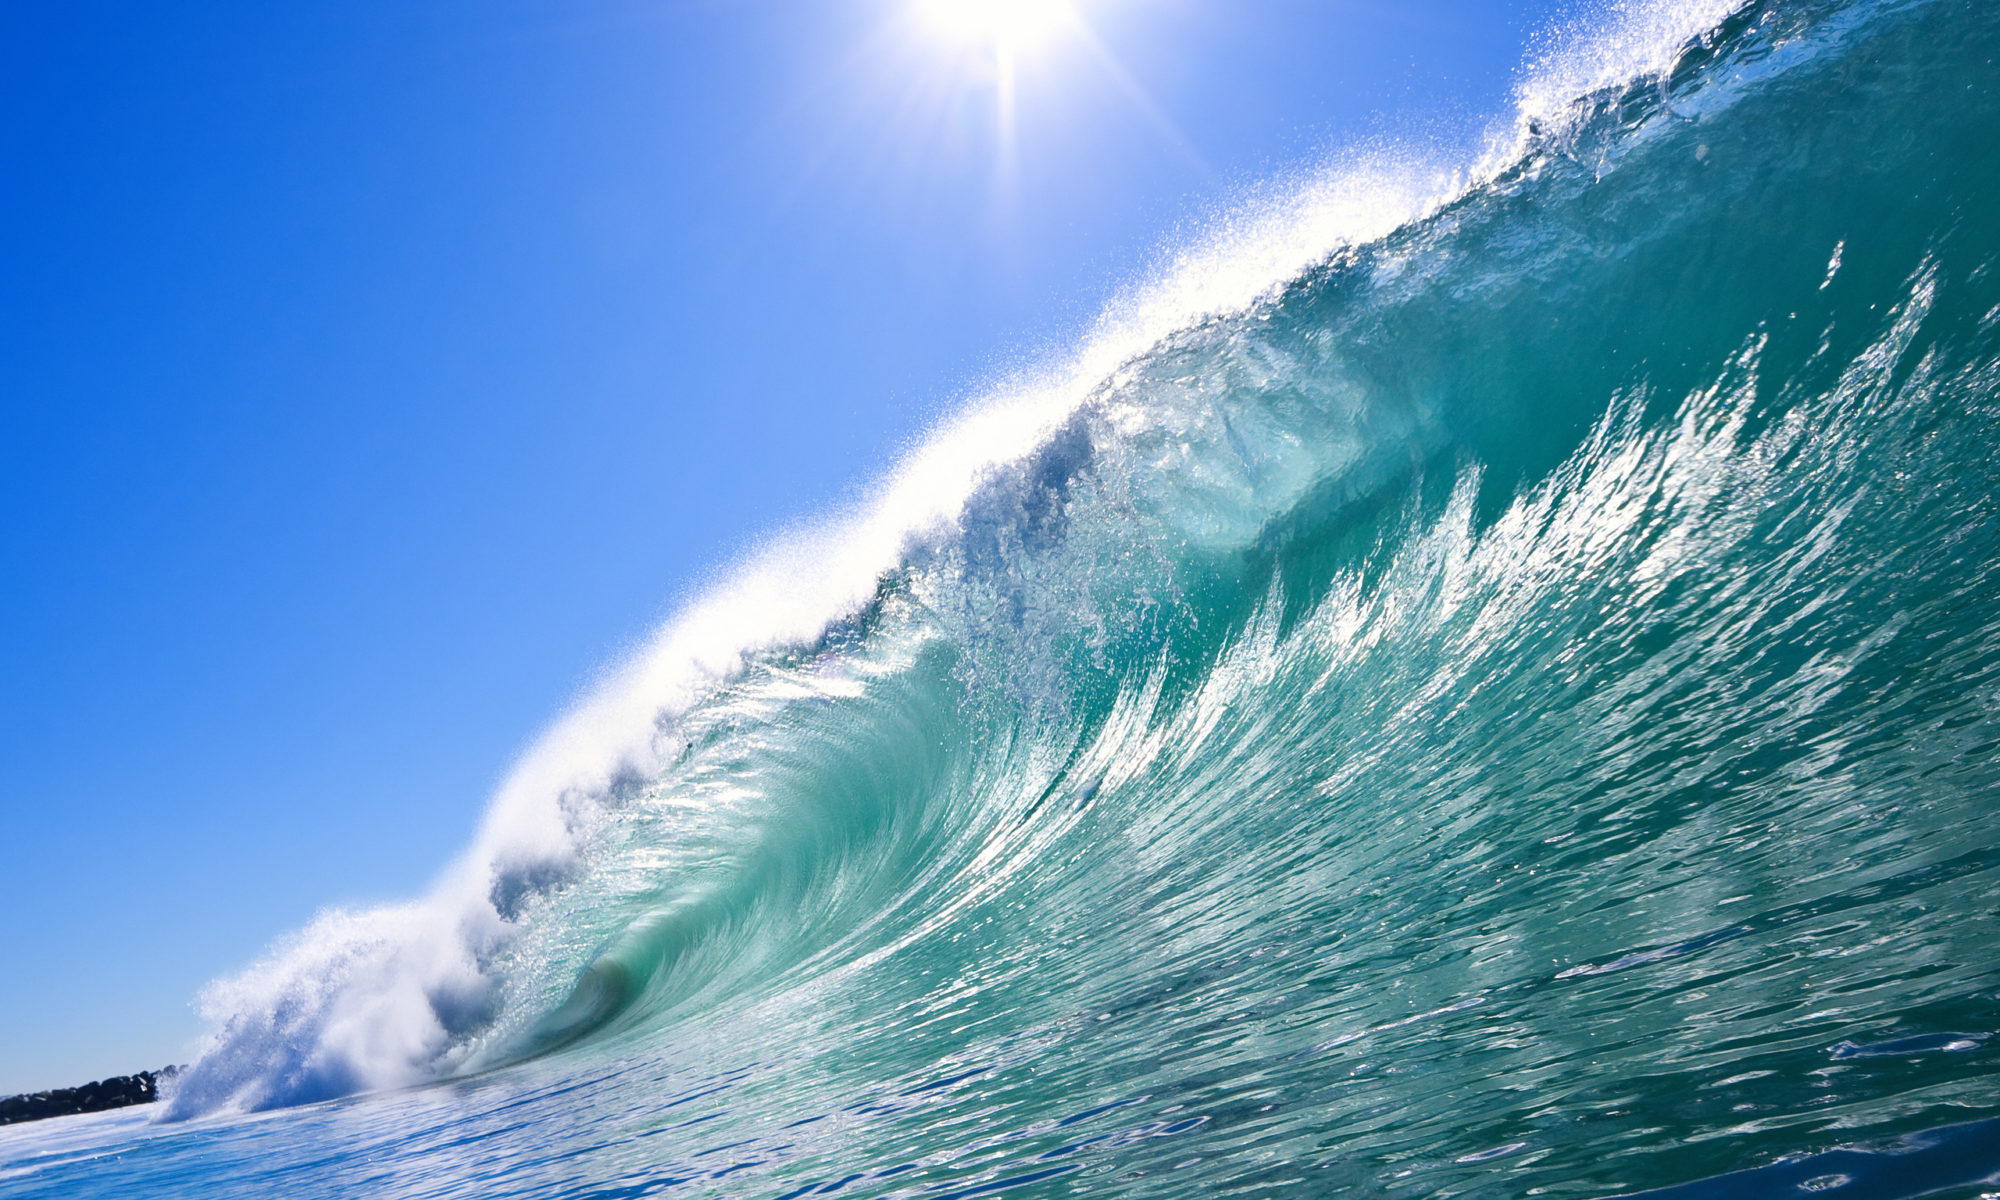 Tidal Waves – A WAVES Full Node operated by Tidal Waves